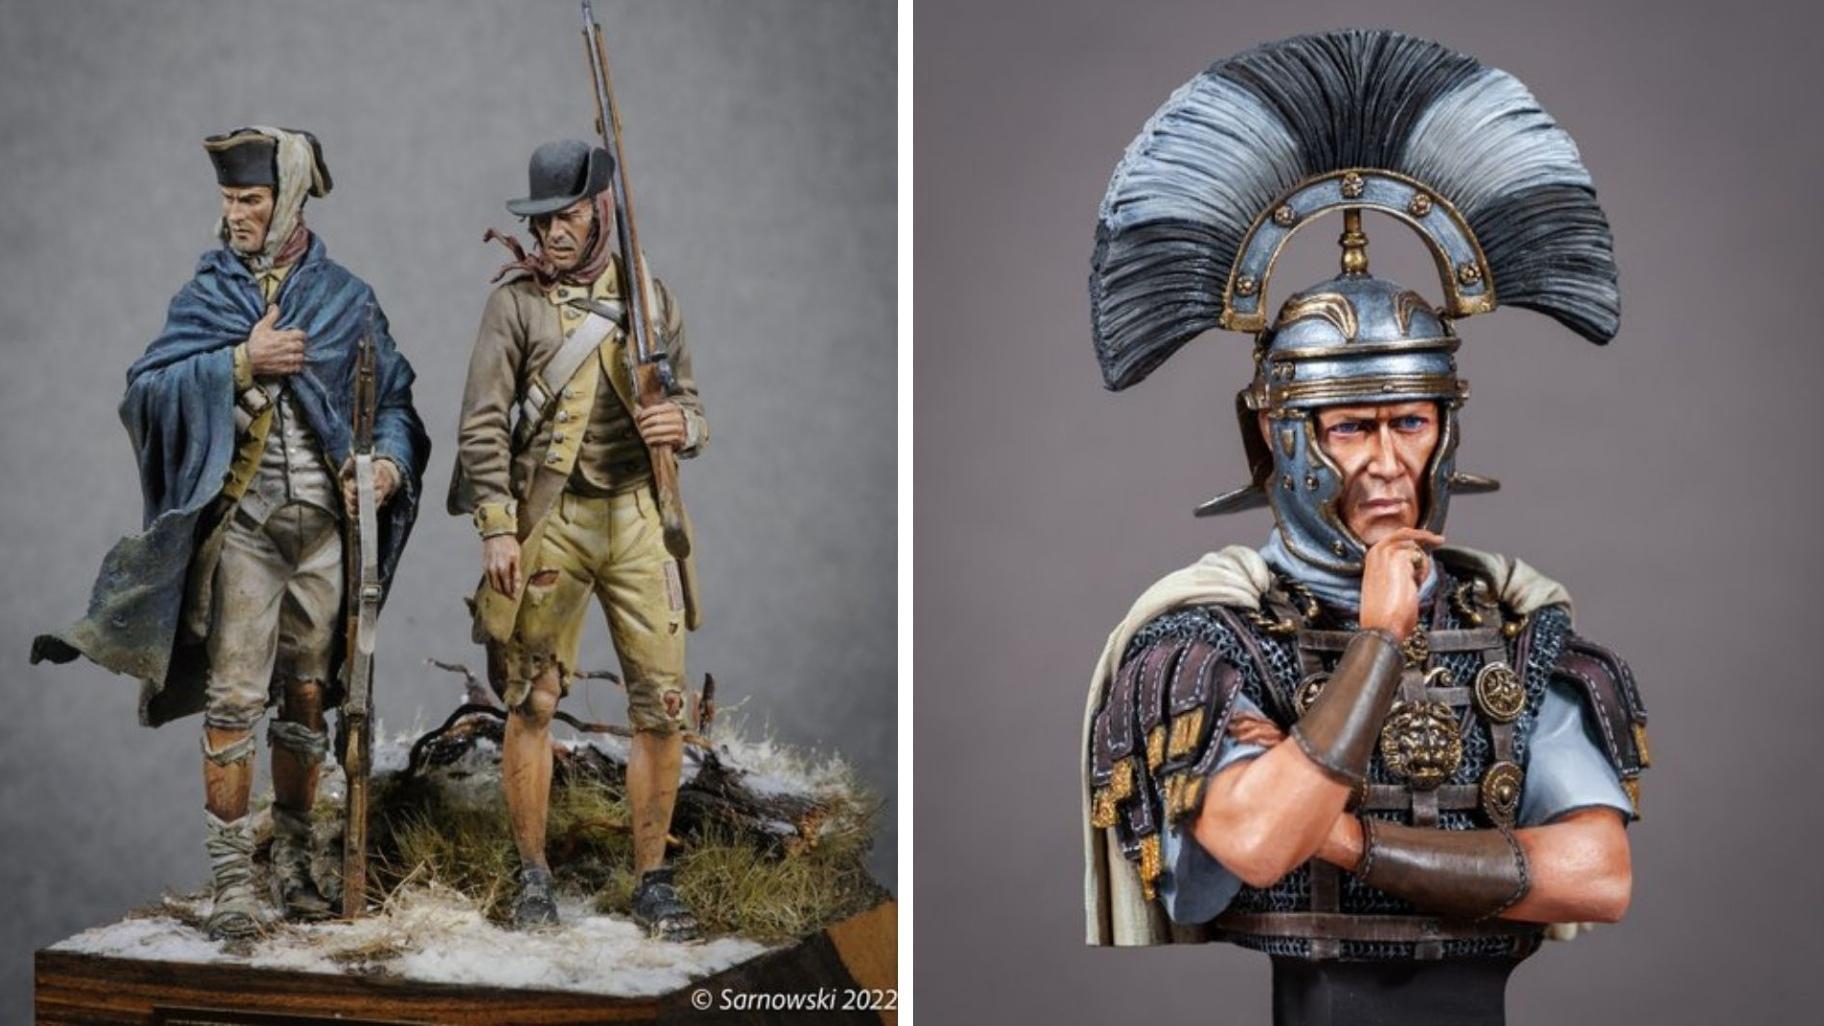 Left: “Valley Forge 1777” by John Rosengrant. (Courtesy of the Military Miniature Society of Illinois) Right: “Centurian” by Tom Williams. (Courtesy of the Military Miniature Society of Illinois)